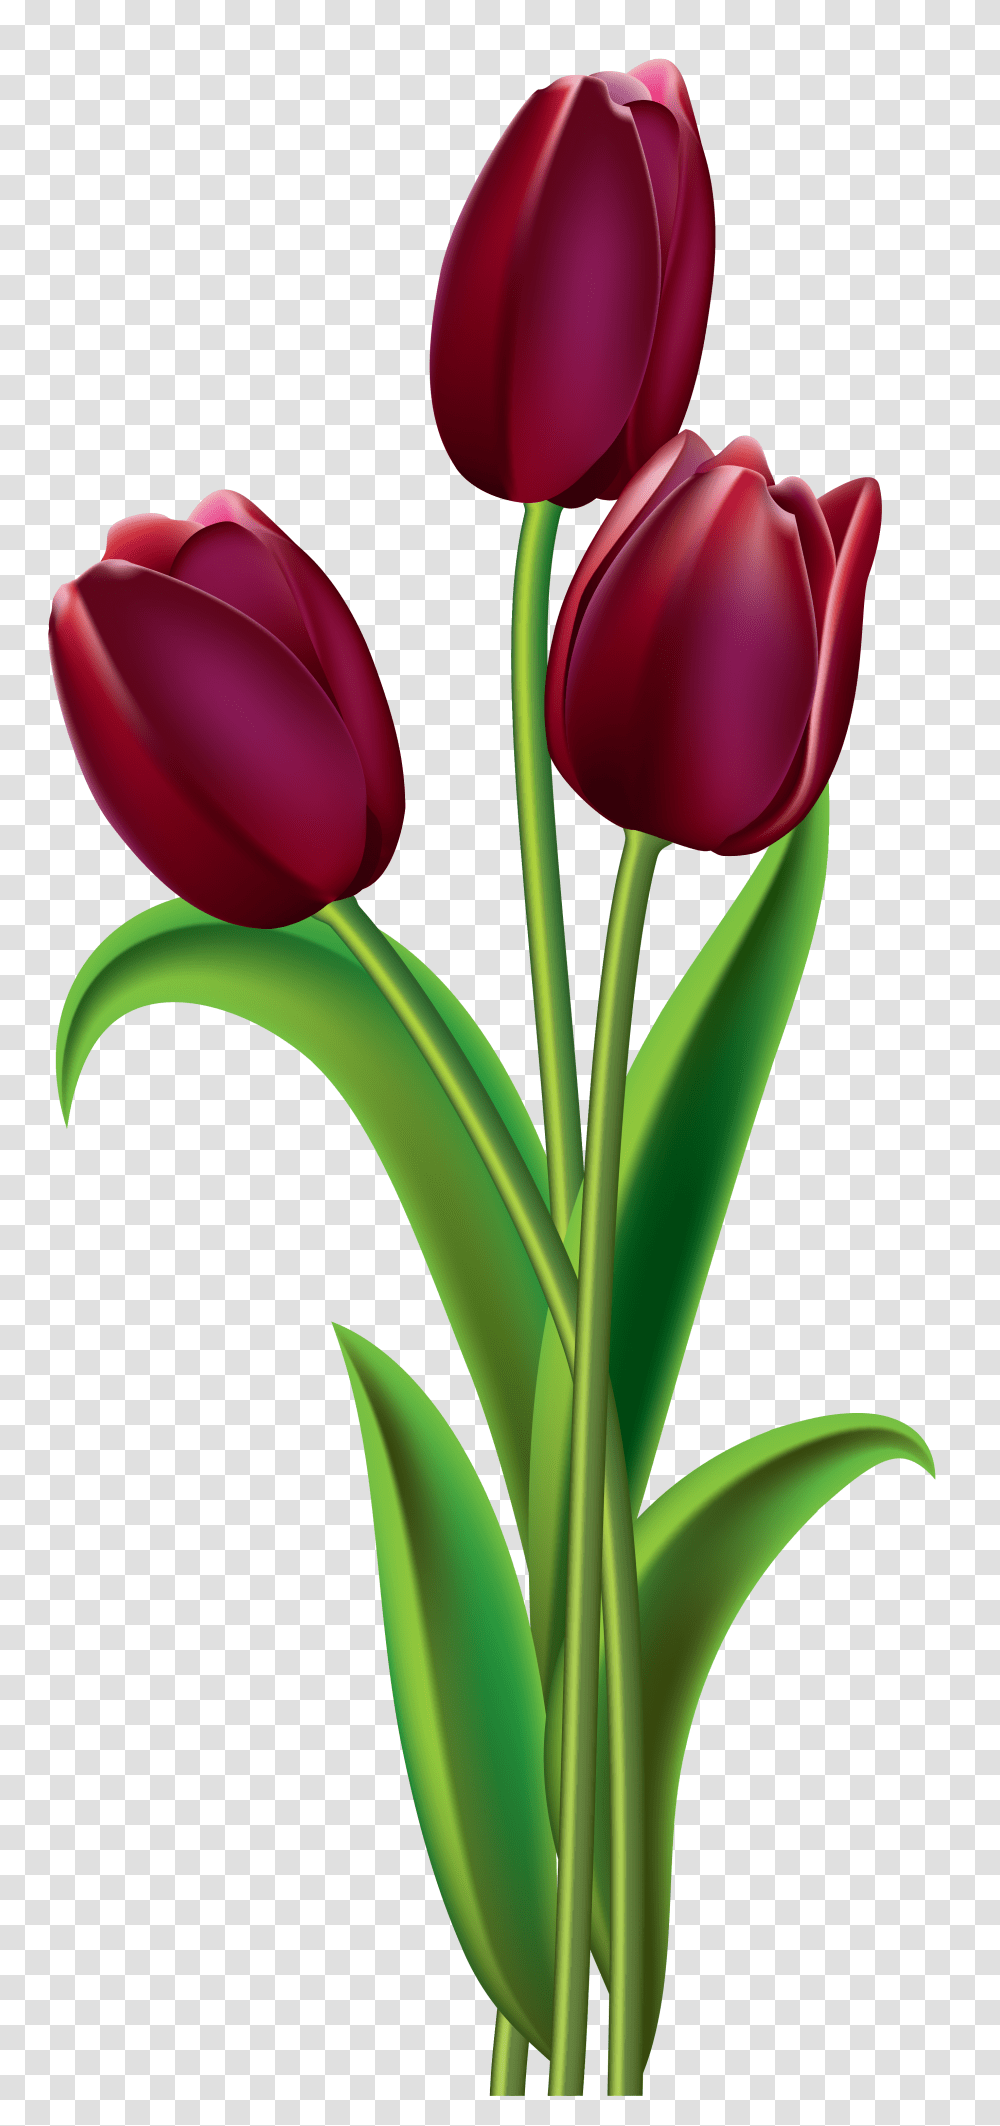 Tulips Clipart Image Gallery Yopriceville High Flower Background, Plant, Blossom Transparent Png